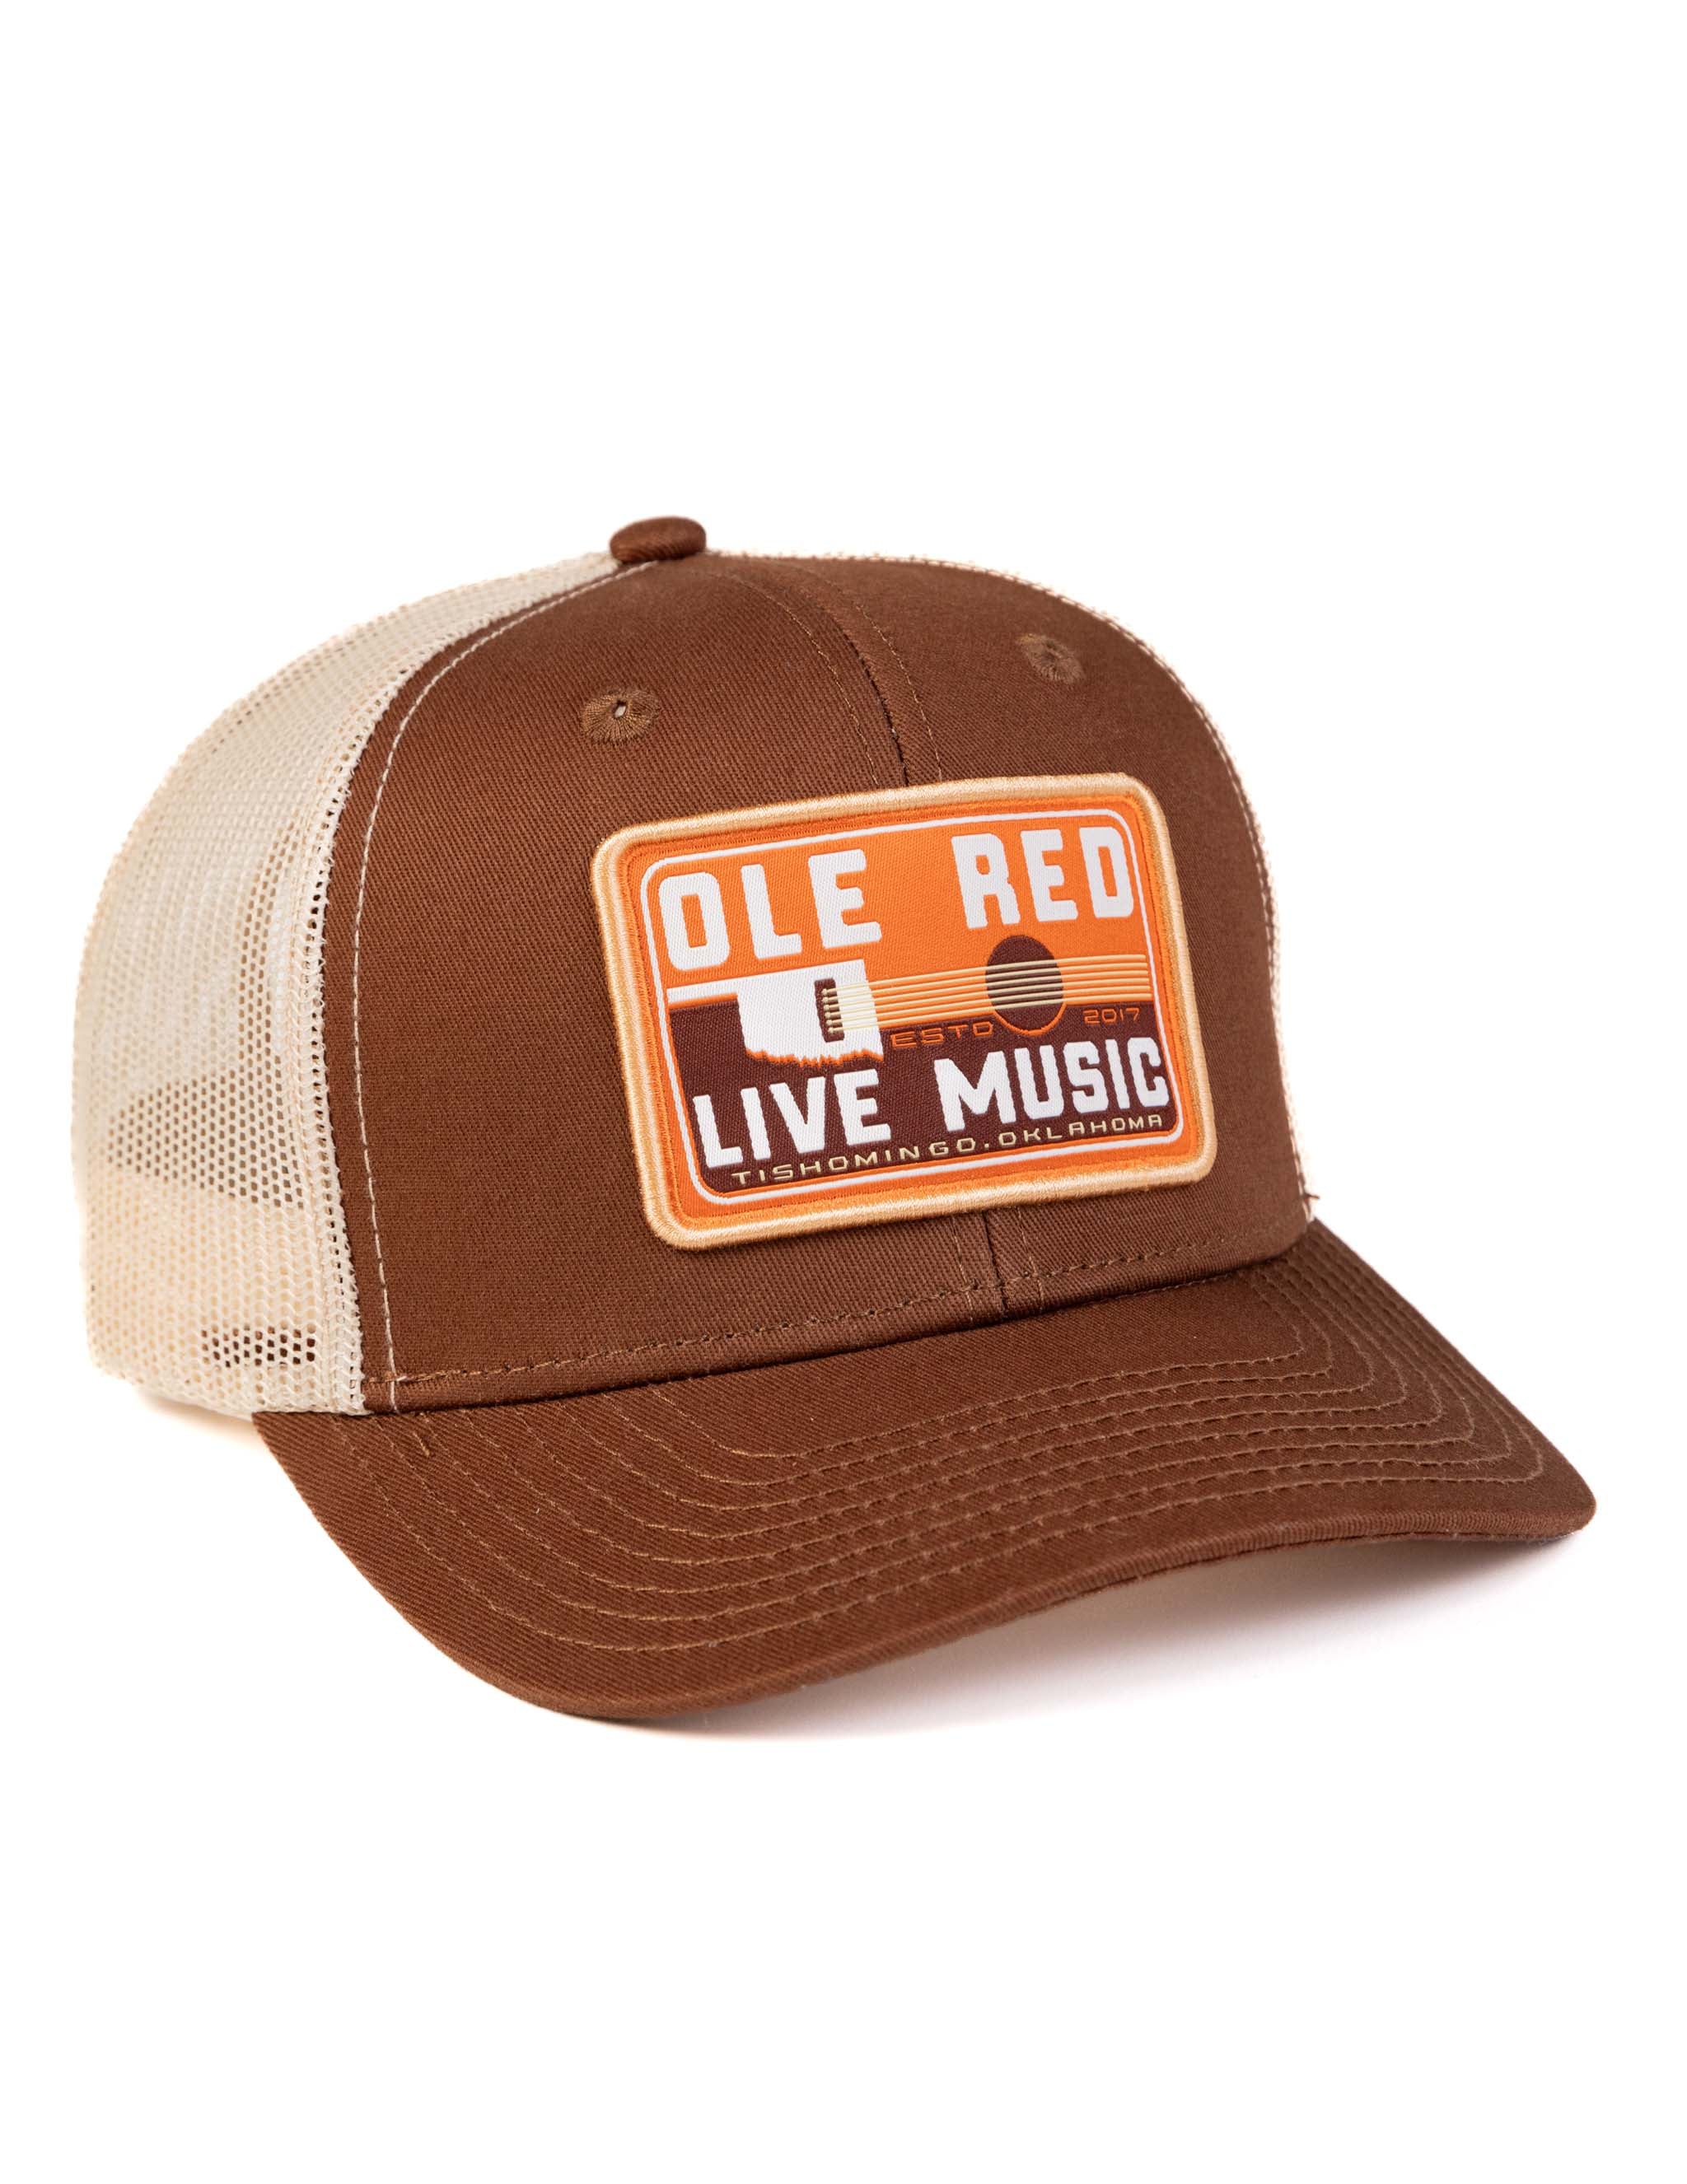 Ole Red Tishomingo Oklahoma Guitar Patch Mesh Hat